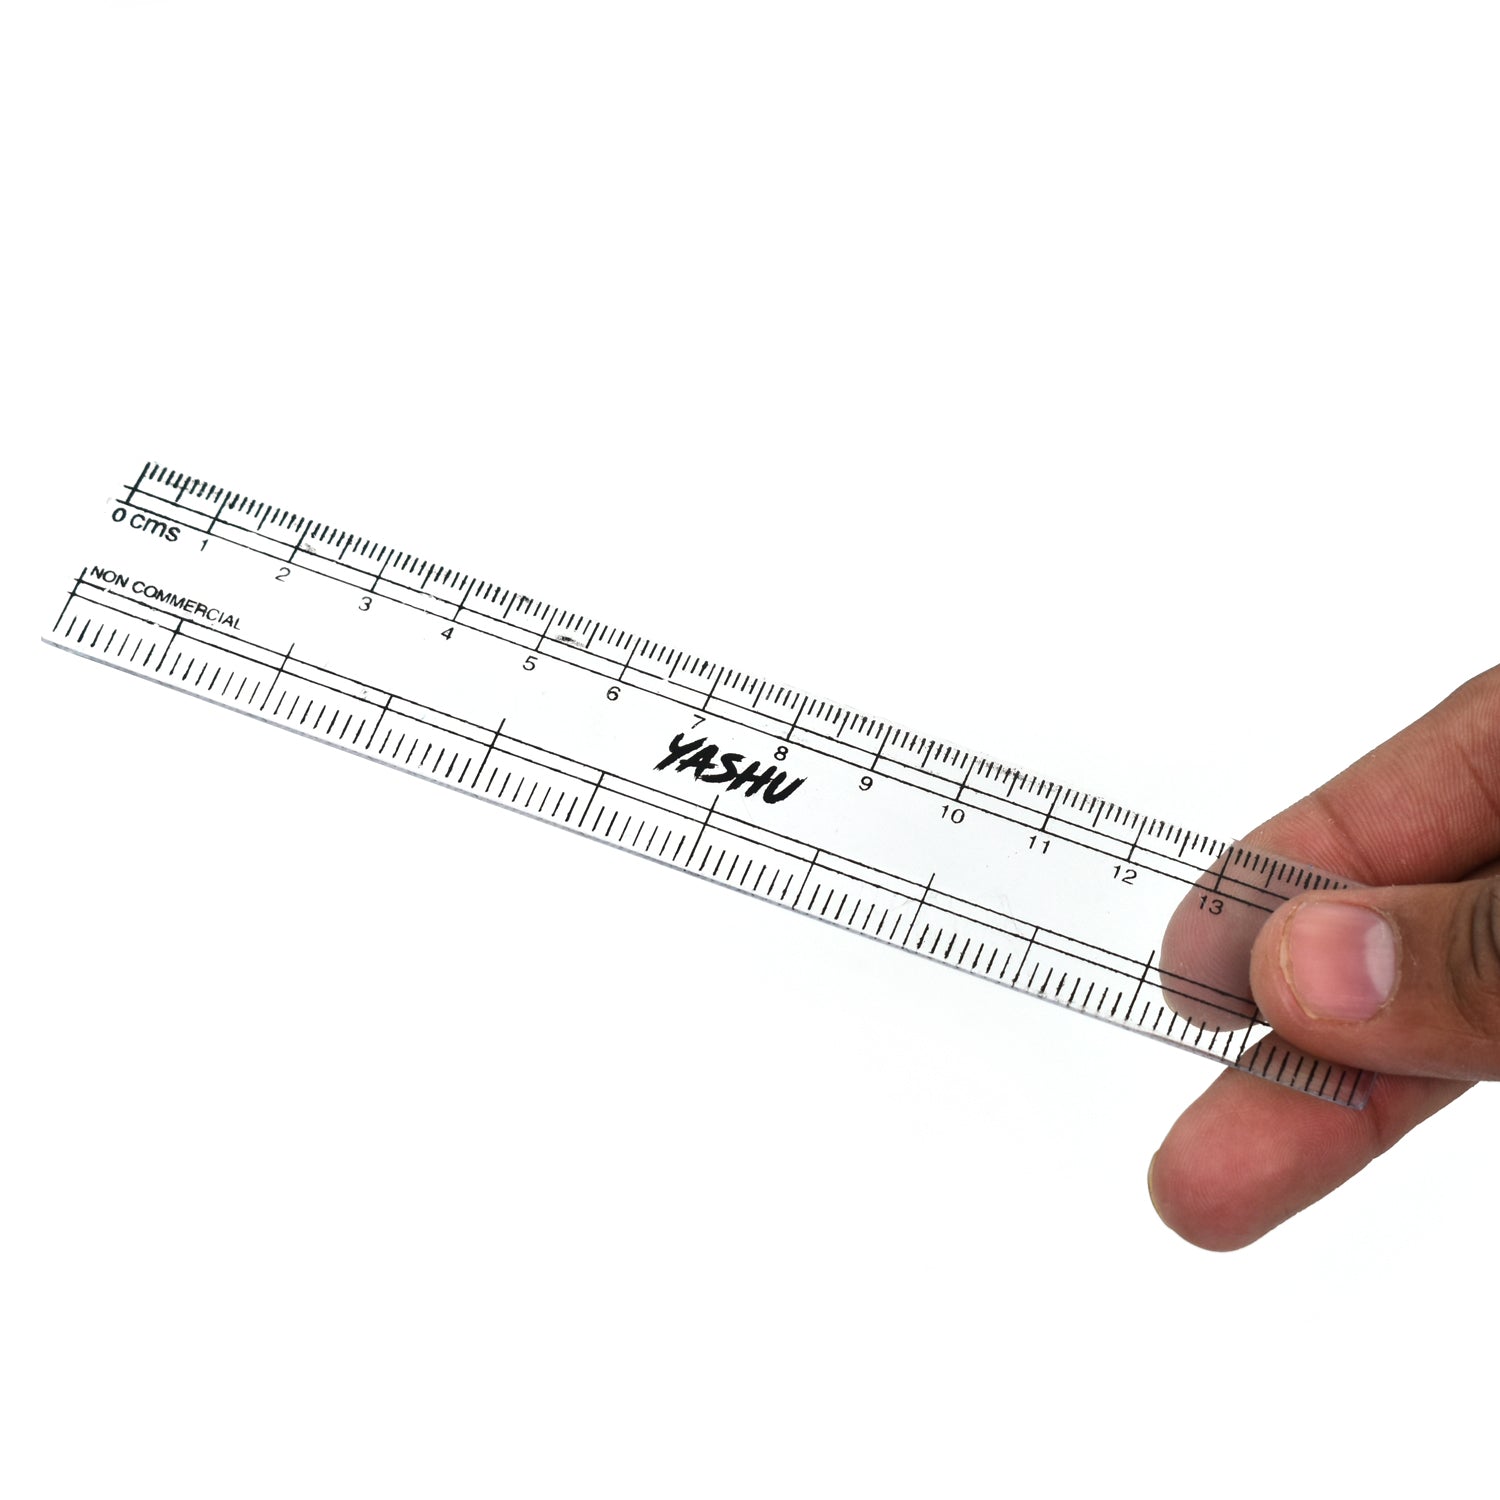 4840 15Cm Ruler For Student Purposes While Studying And Learning In Schools And Homes Etc. (1Pc) DeoDap